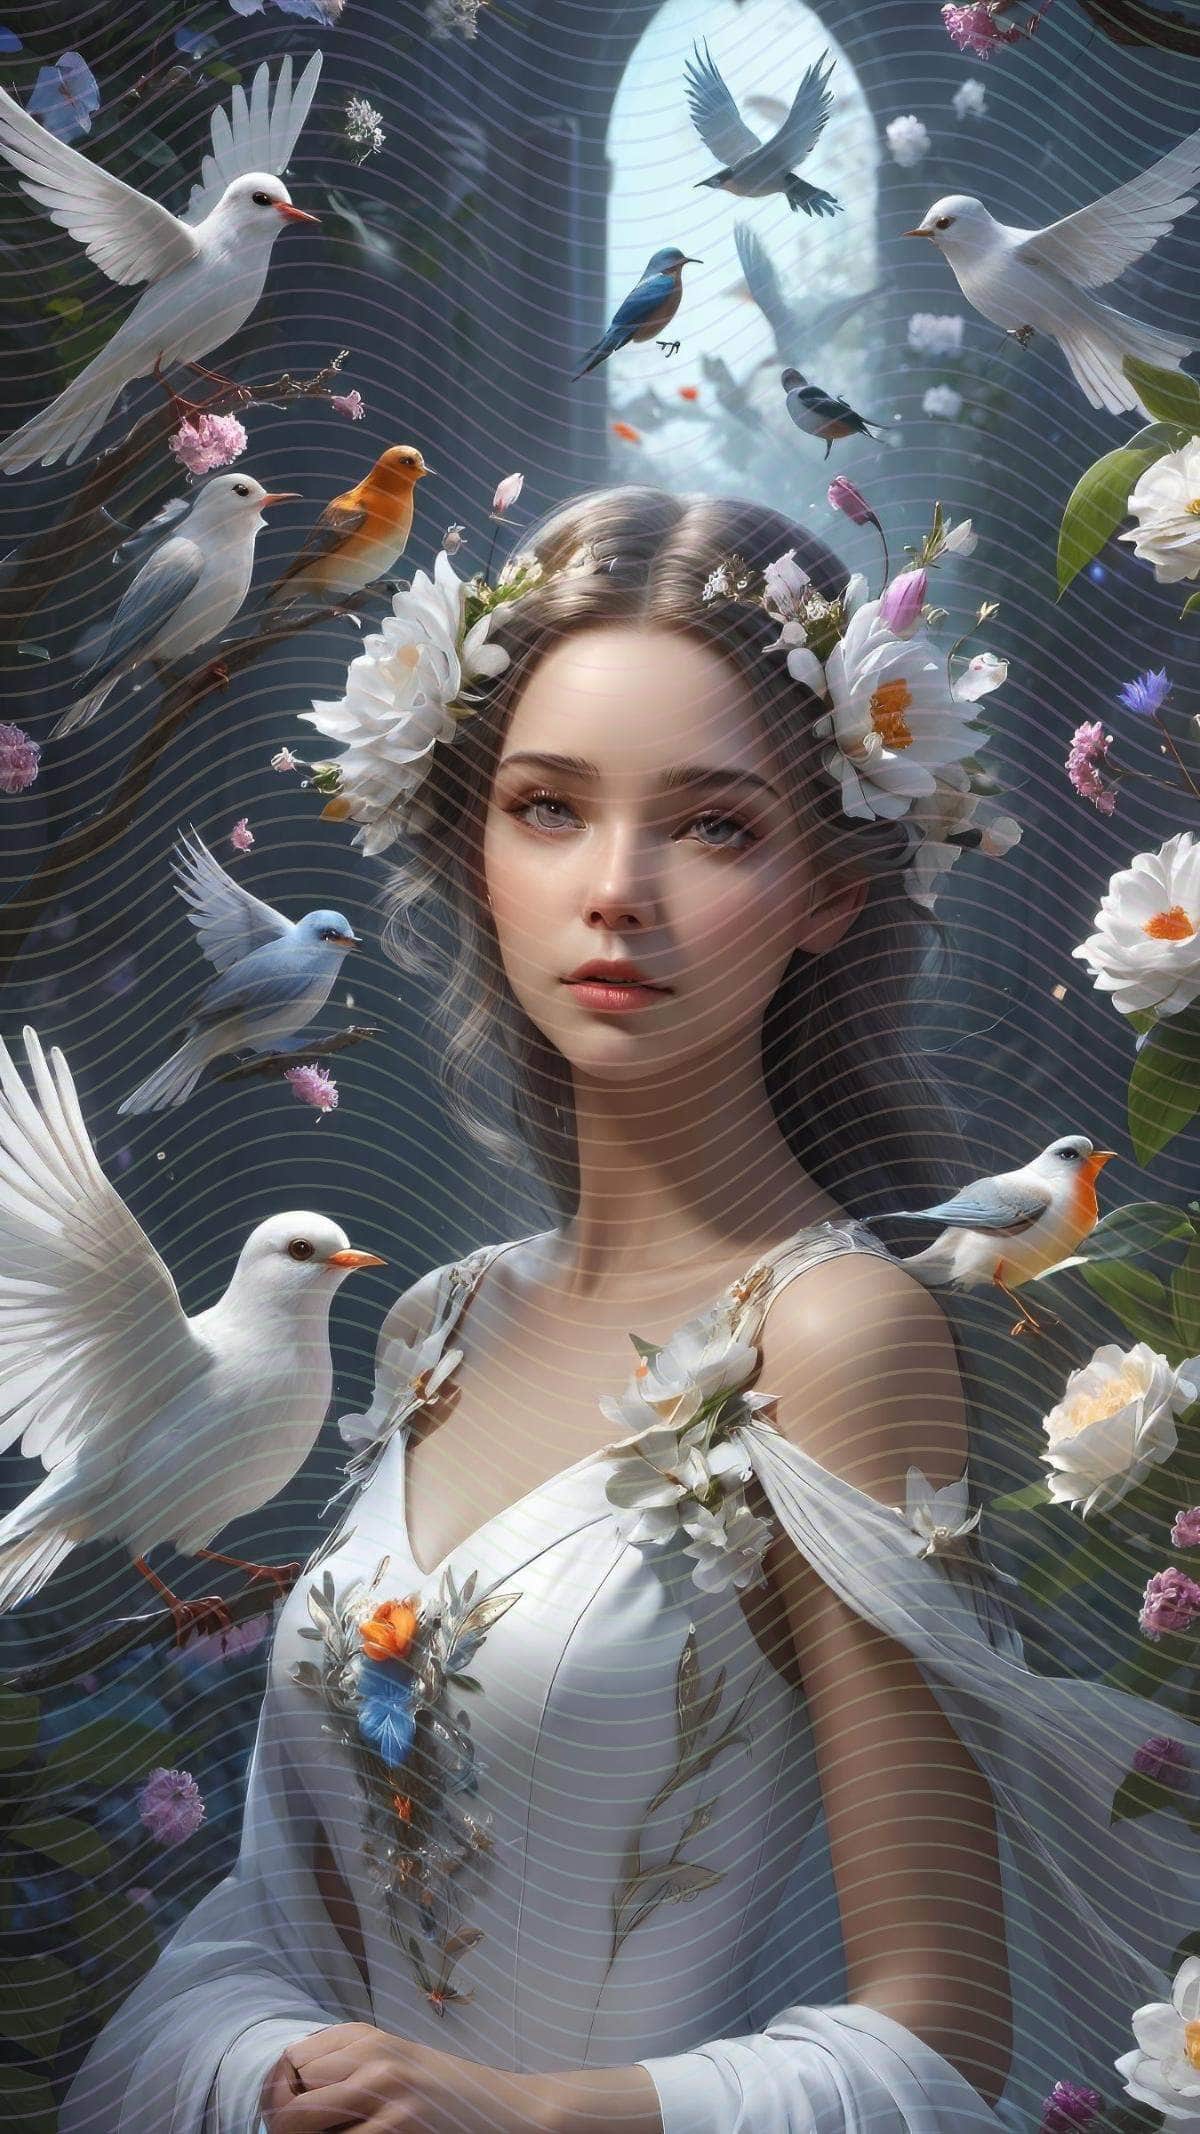 A Woman in A White Dress Surrounded by Birds